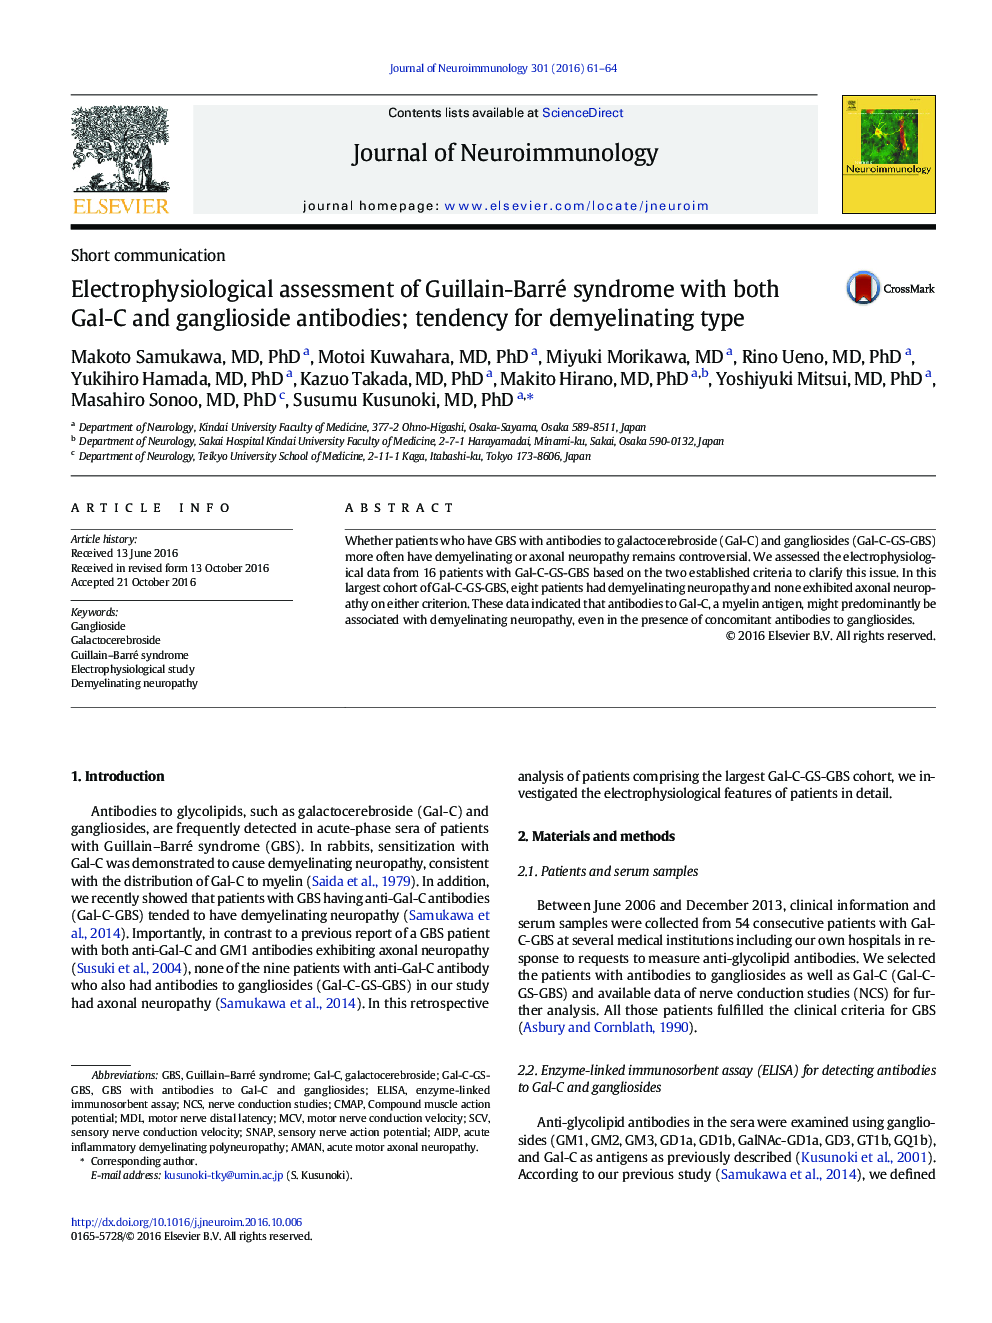 Short communicationElectrophysiological assessment of Guillain-Barré syndrome with both Gal-C and ganglioside antibodies; tendency for demyelinating type